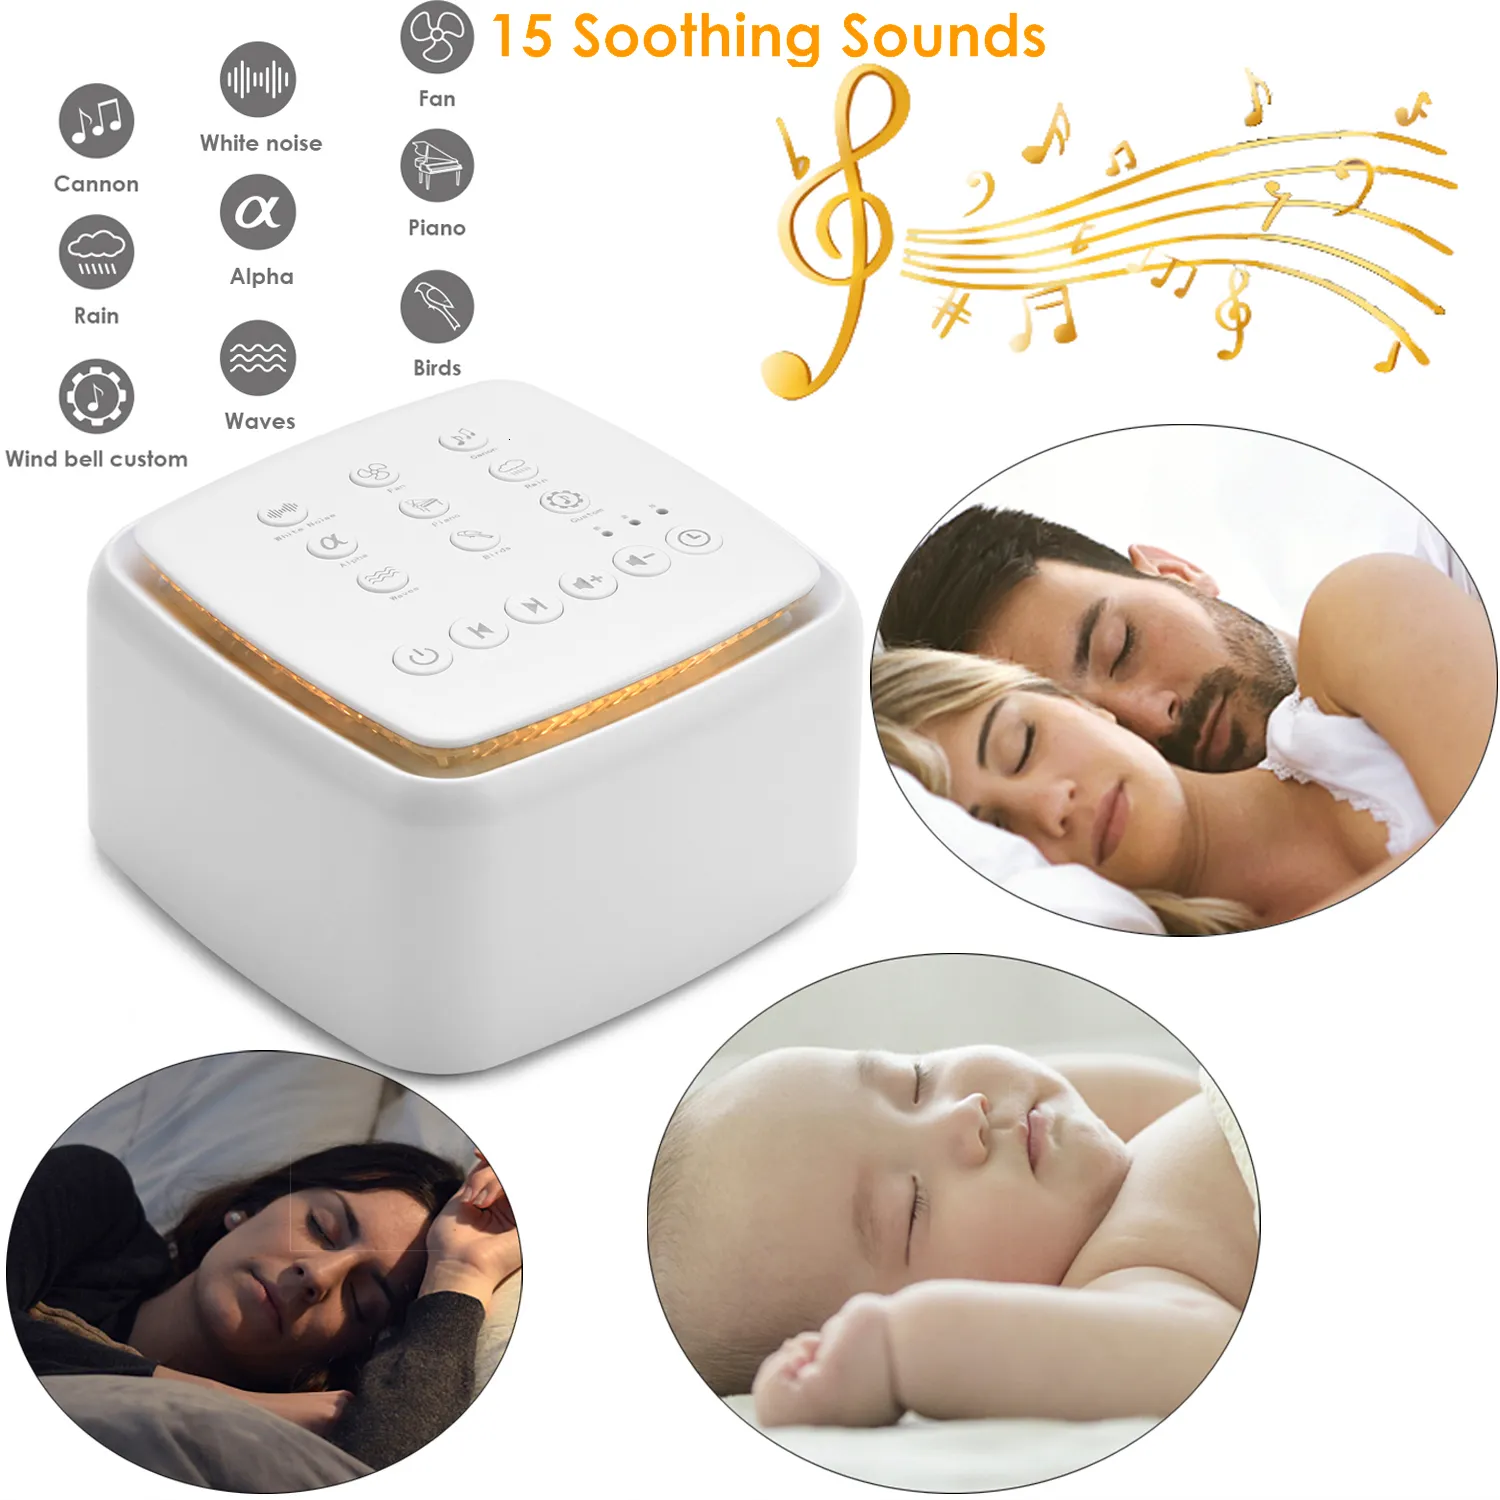 Portable Sers White Noise Machine Typec RECHARGEABLE TIMED STUTDOWN Sleep Sound For Sleeping Relaxation Baby Adult Office Travel 230908